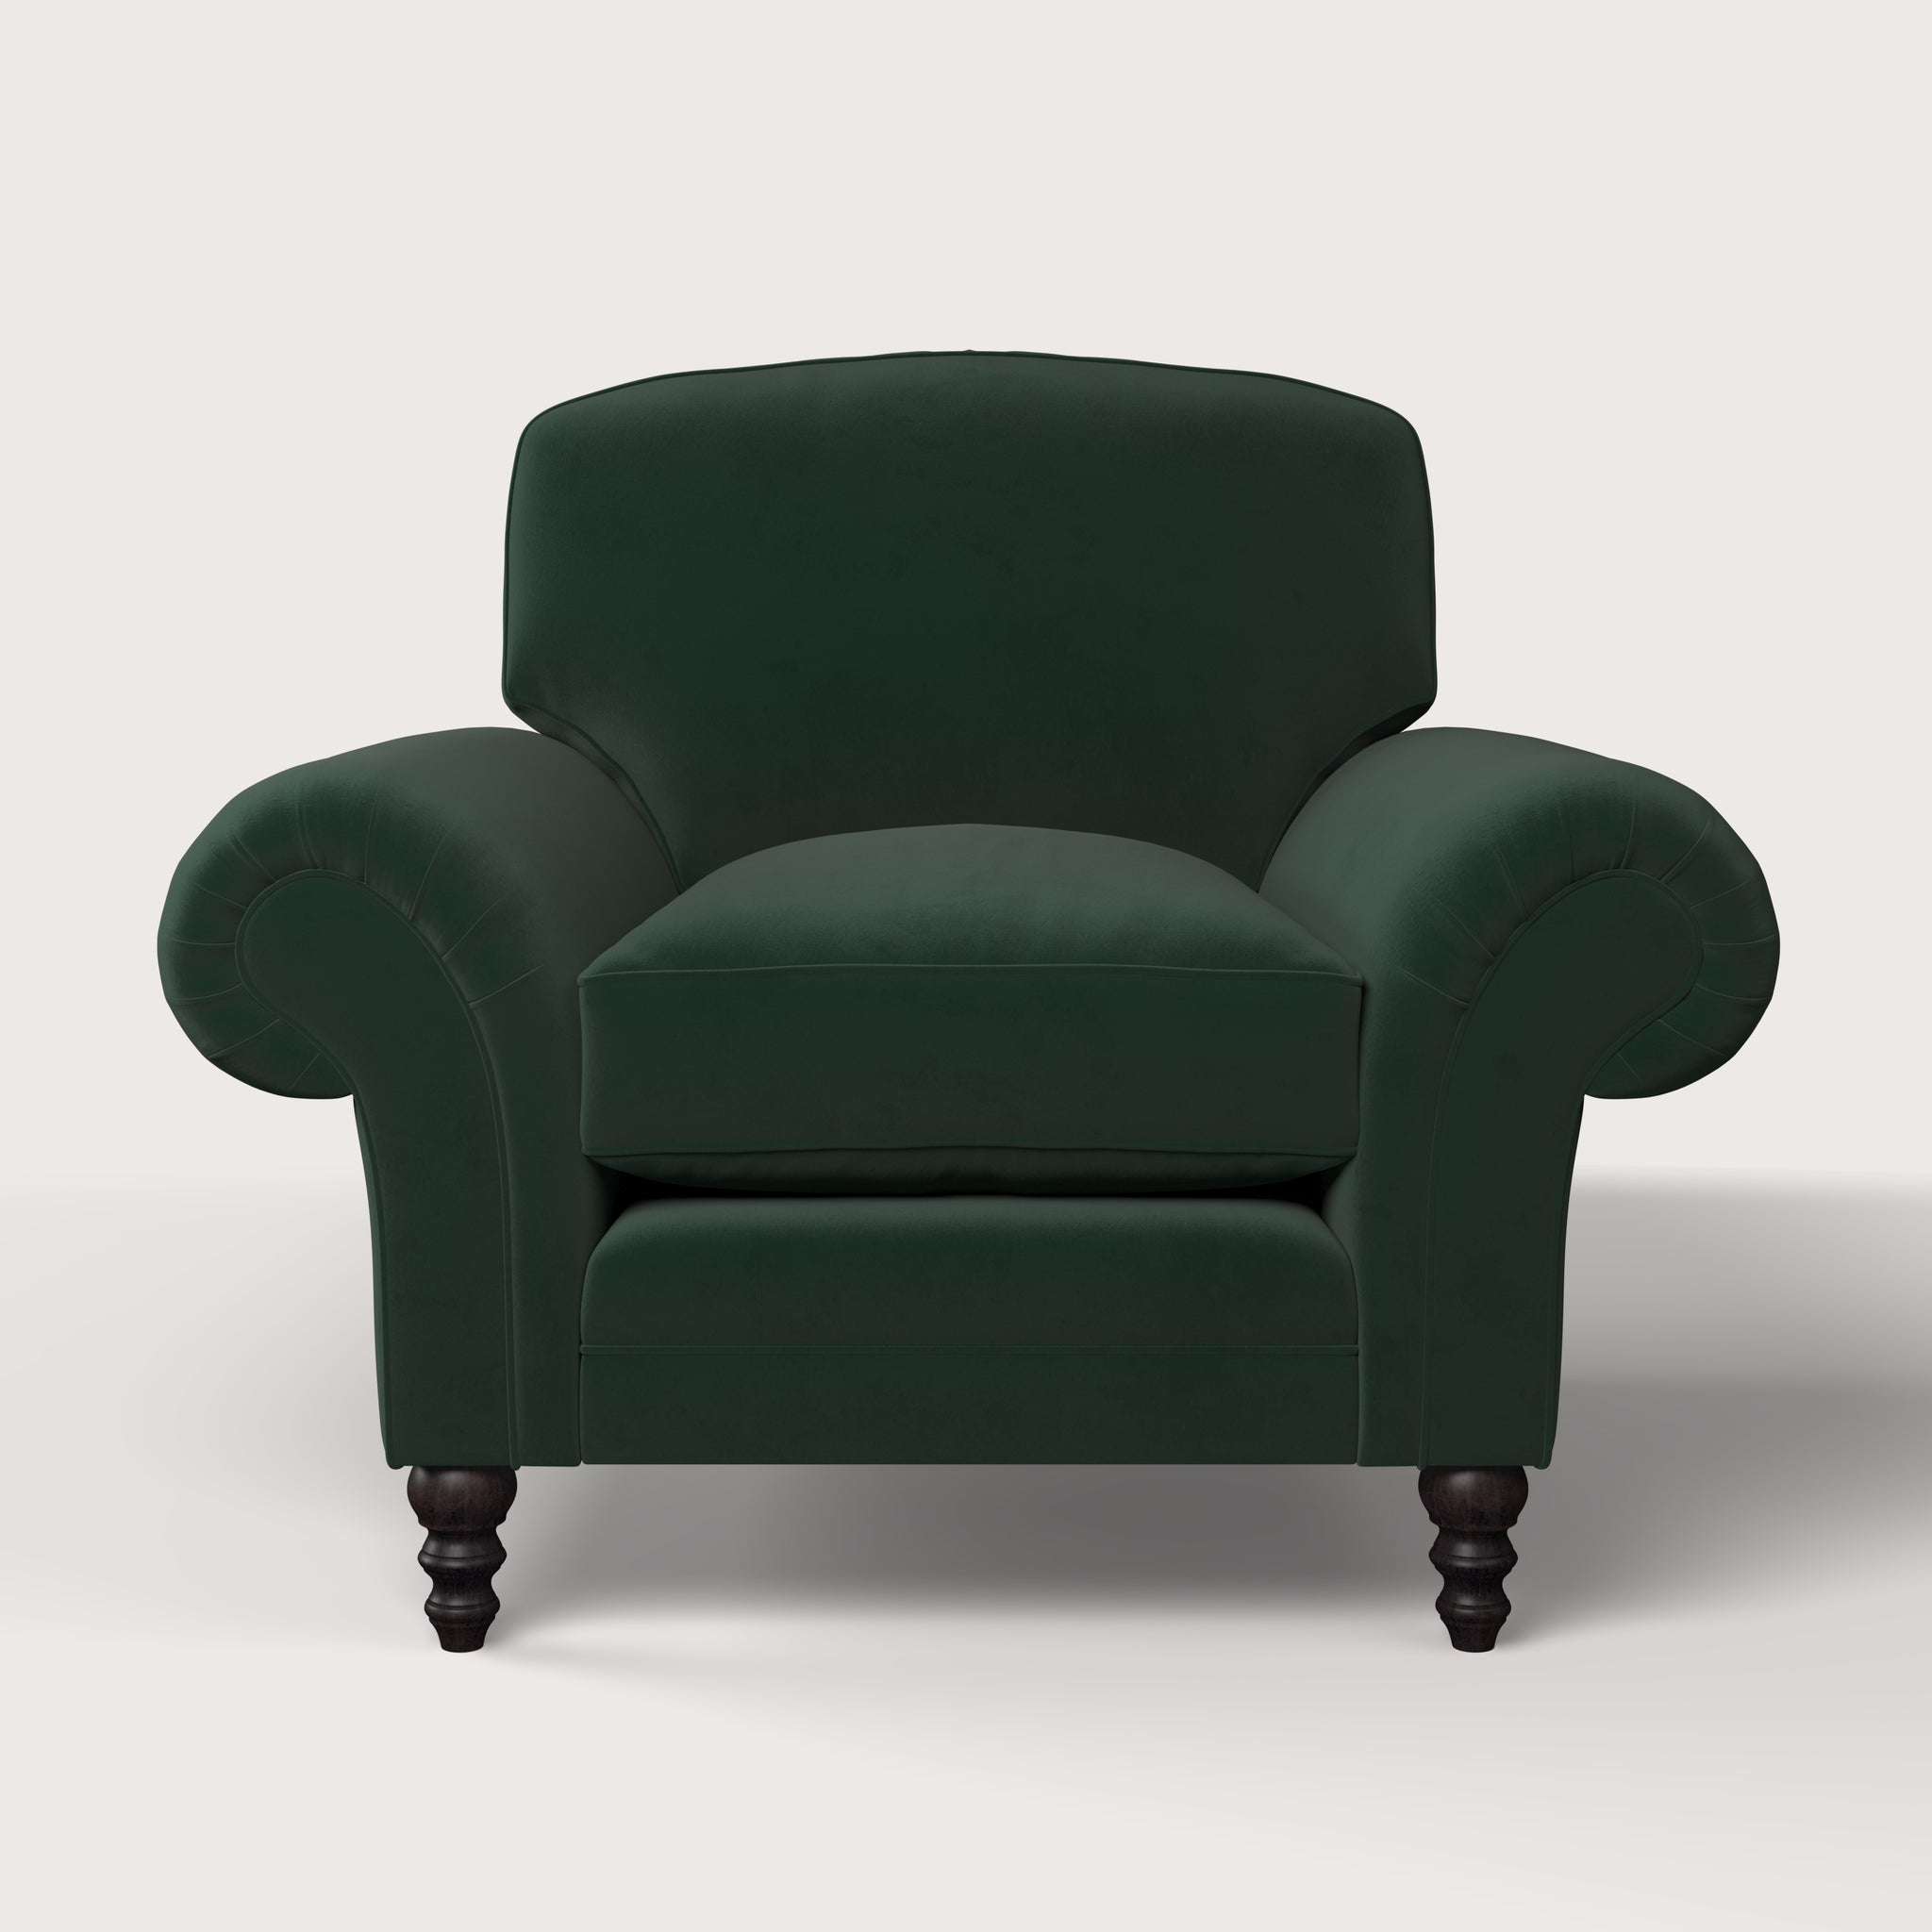 The Moore Armchair